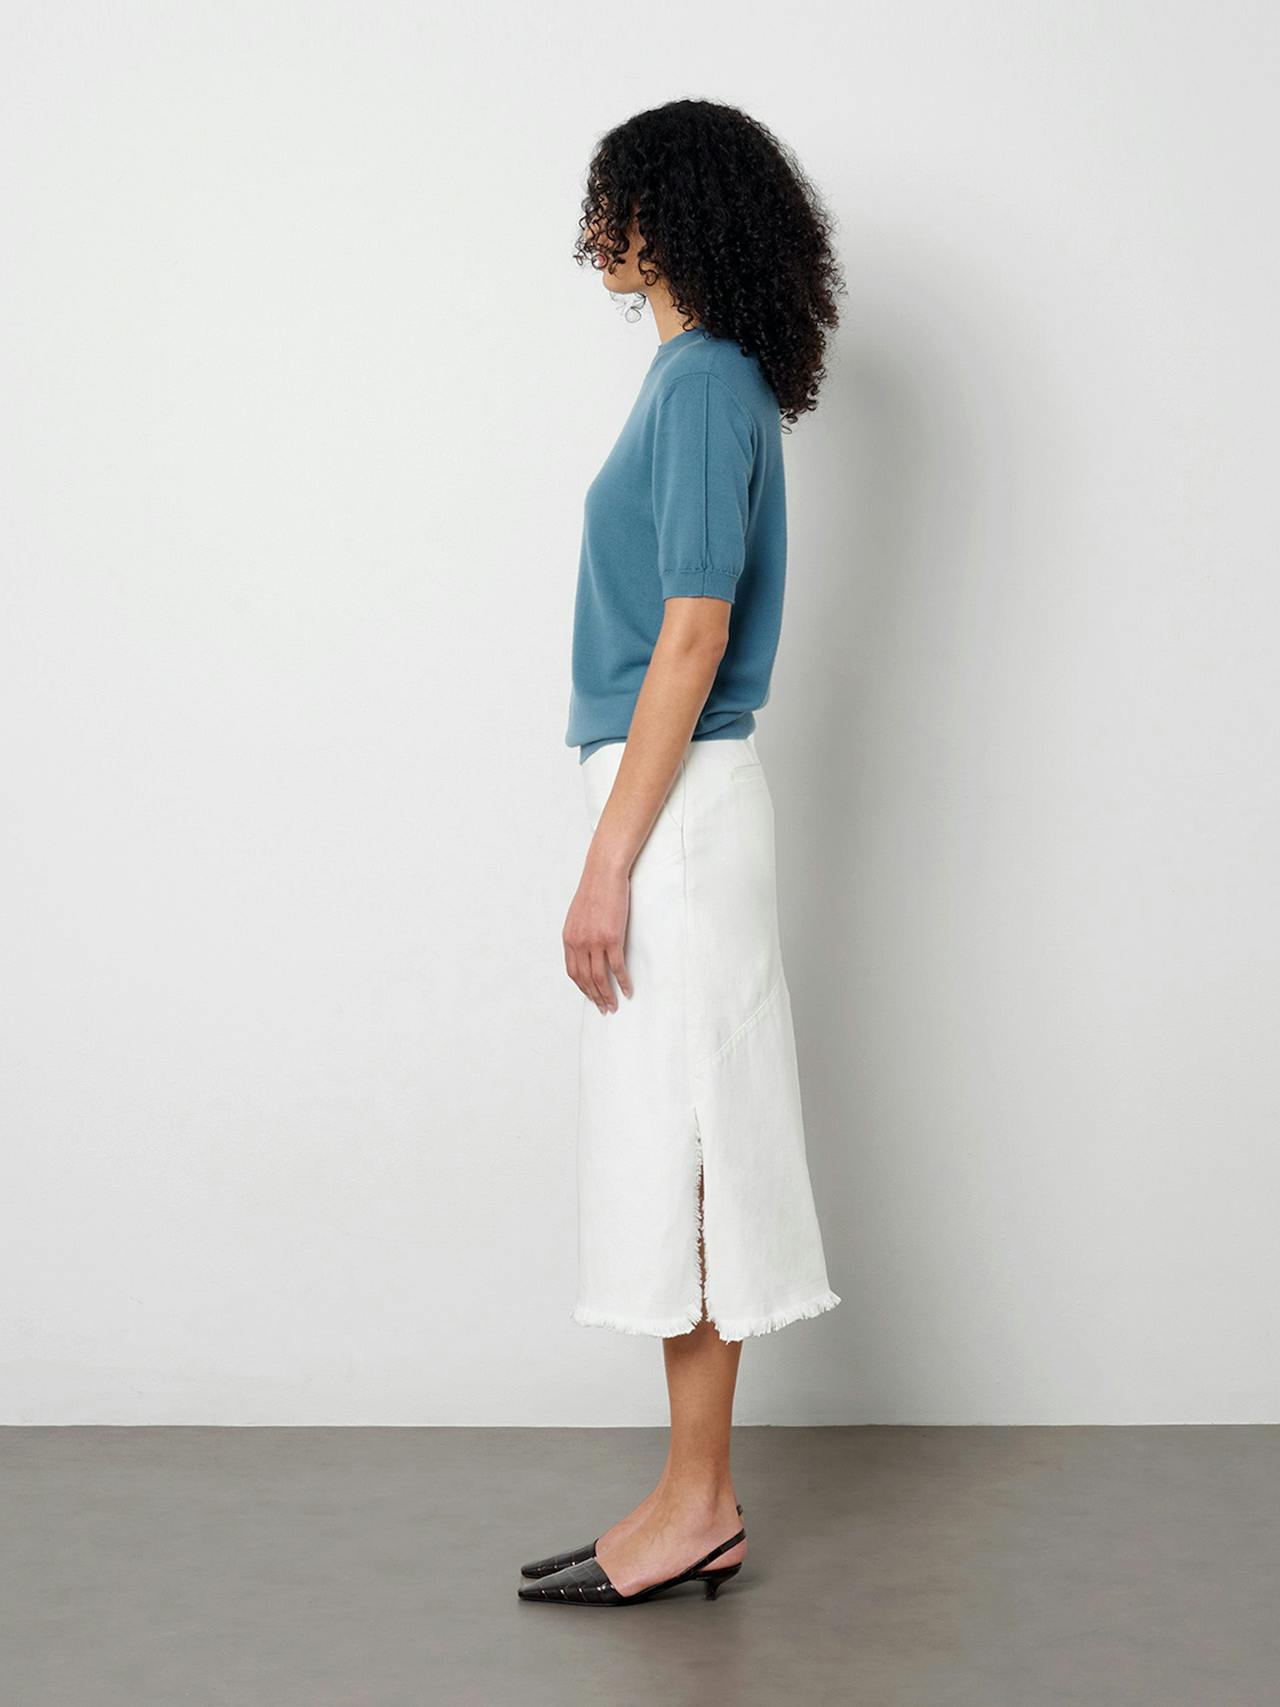 The Uma skirt softly skims the body and falls just below the knee. The crisp white denim is finished with a frayed edge detail at the waist and hem.